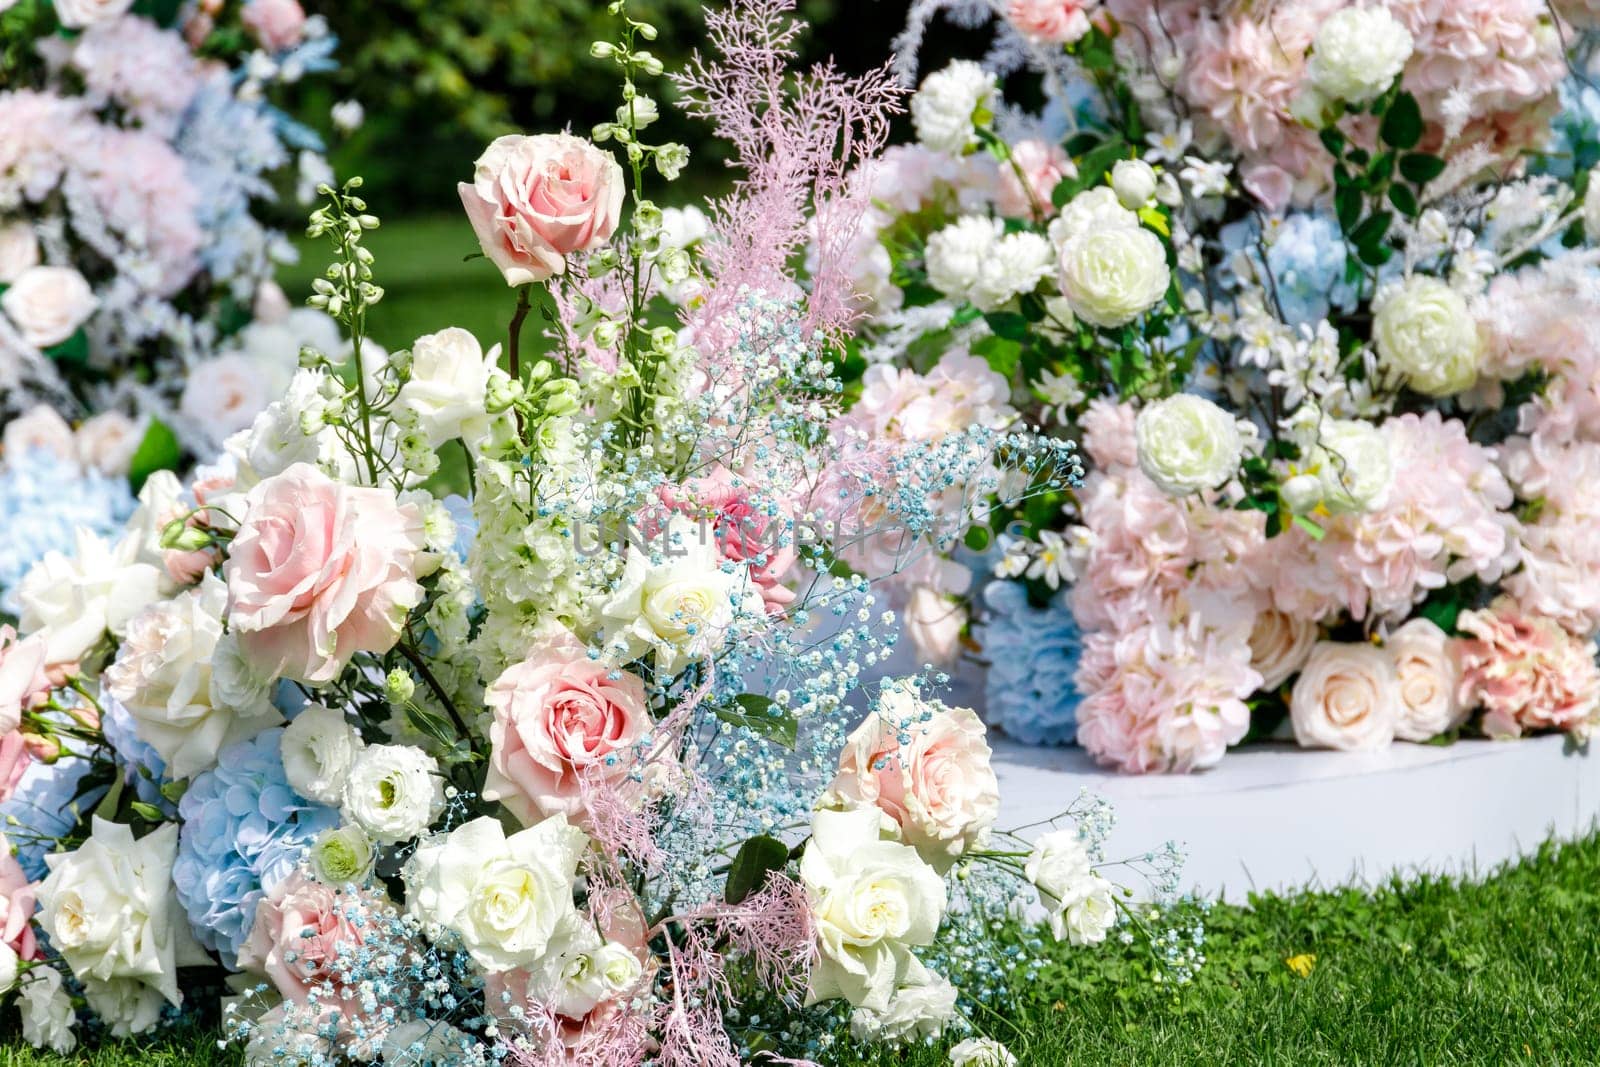 European wedding flowers in different kinds of light pink colors by Rom4ek